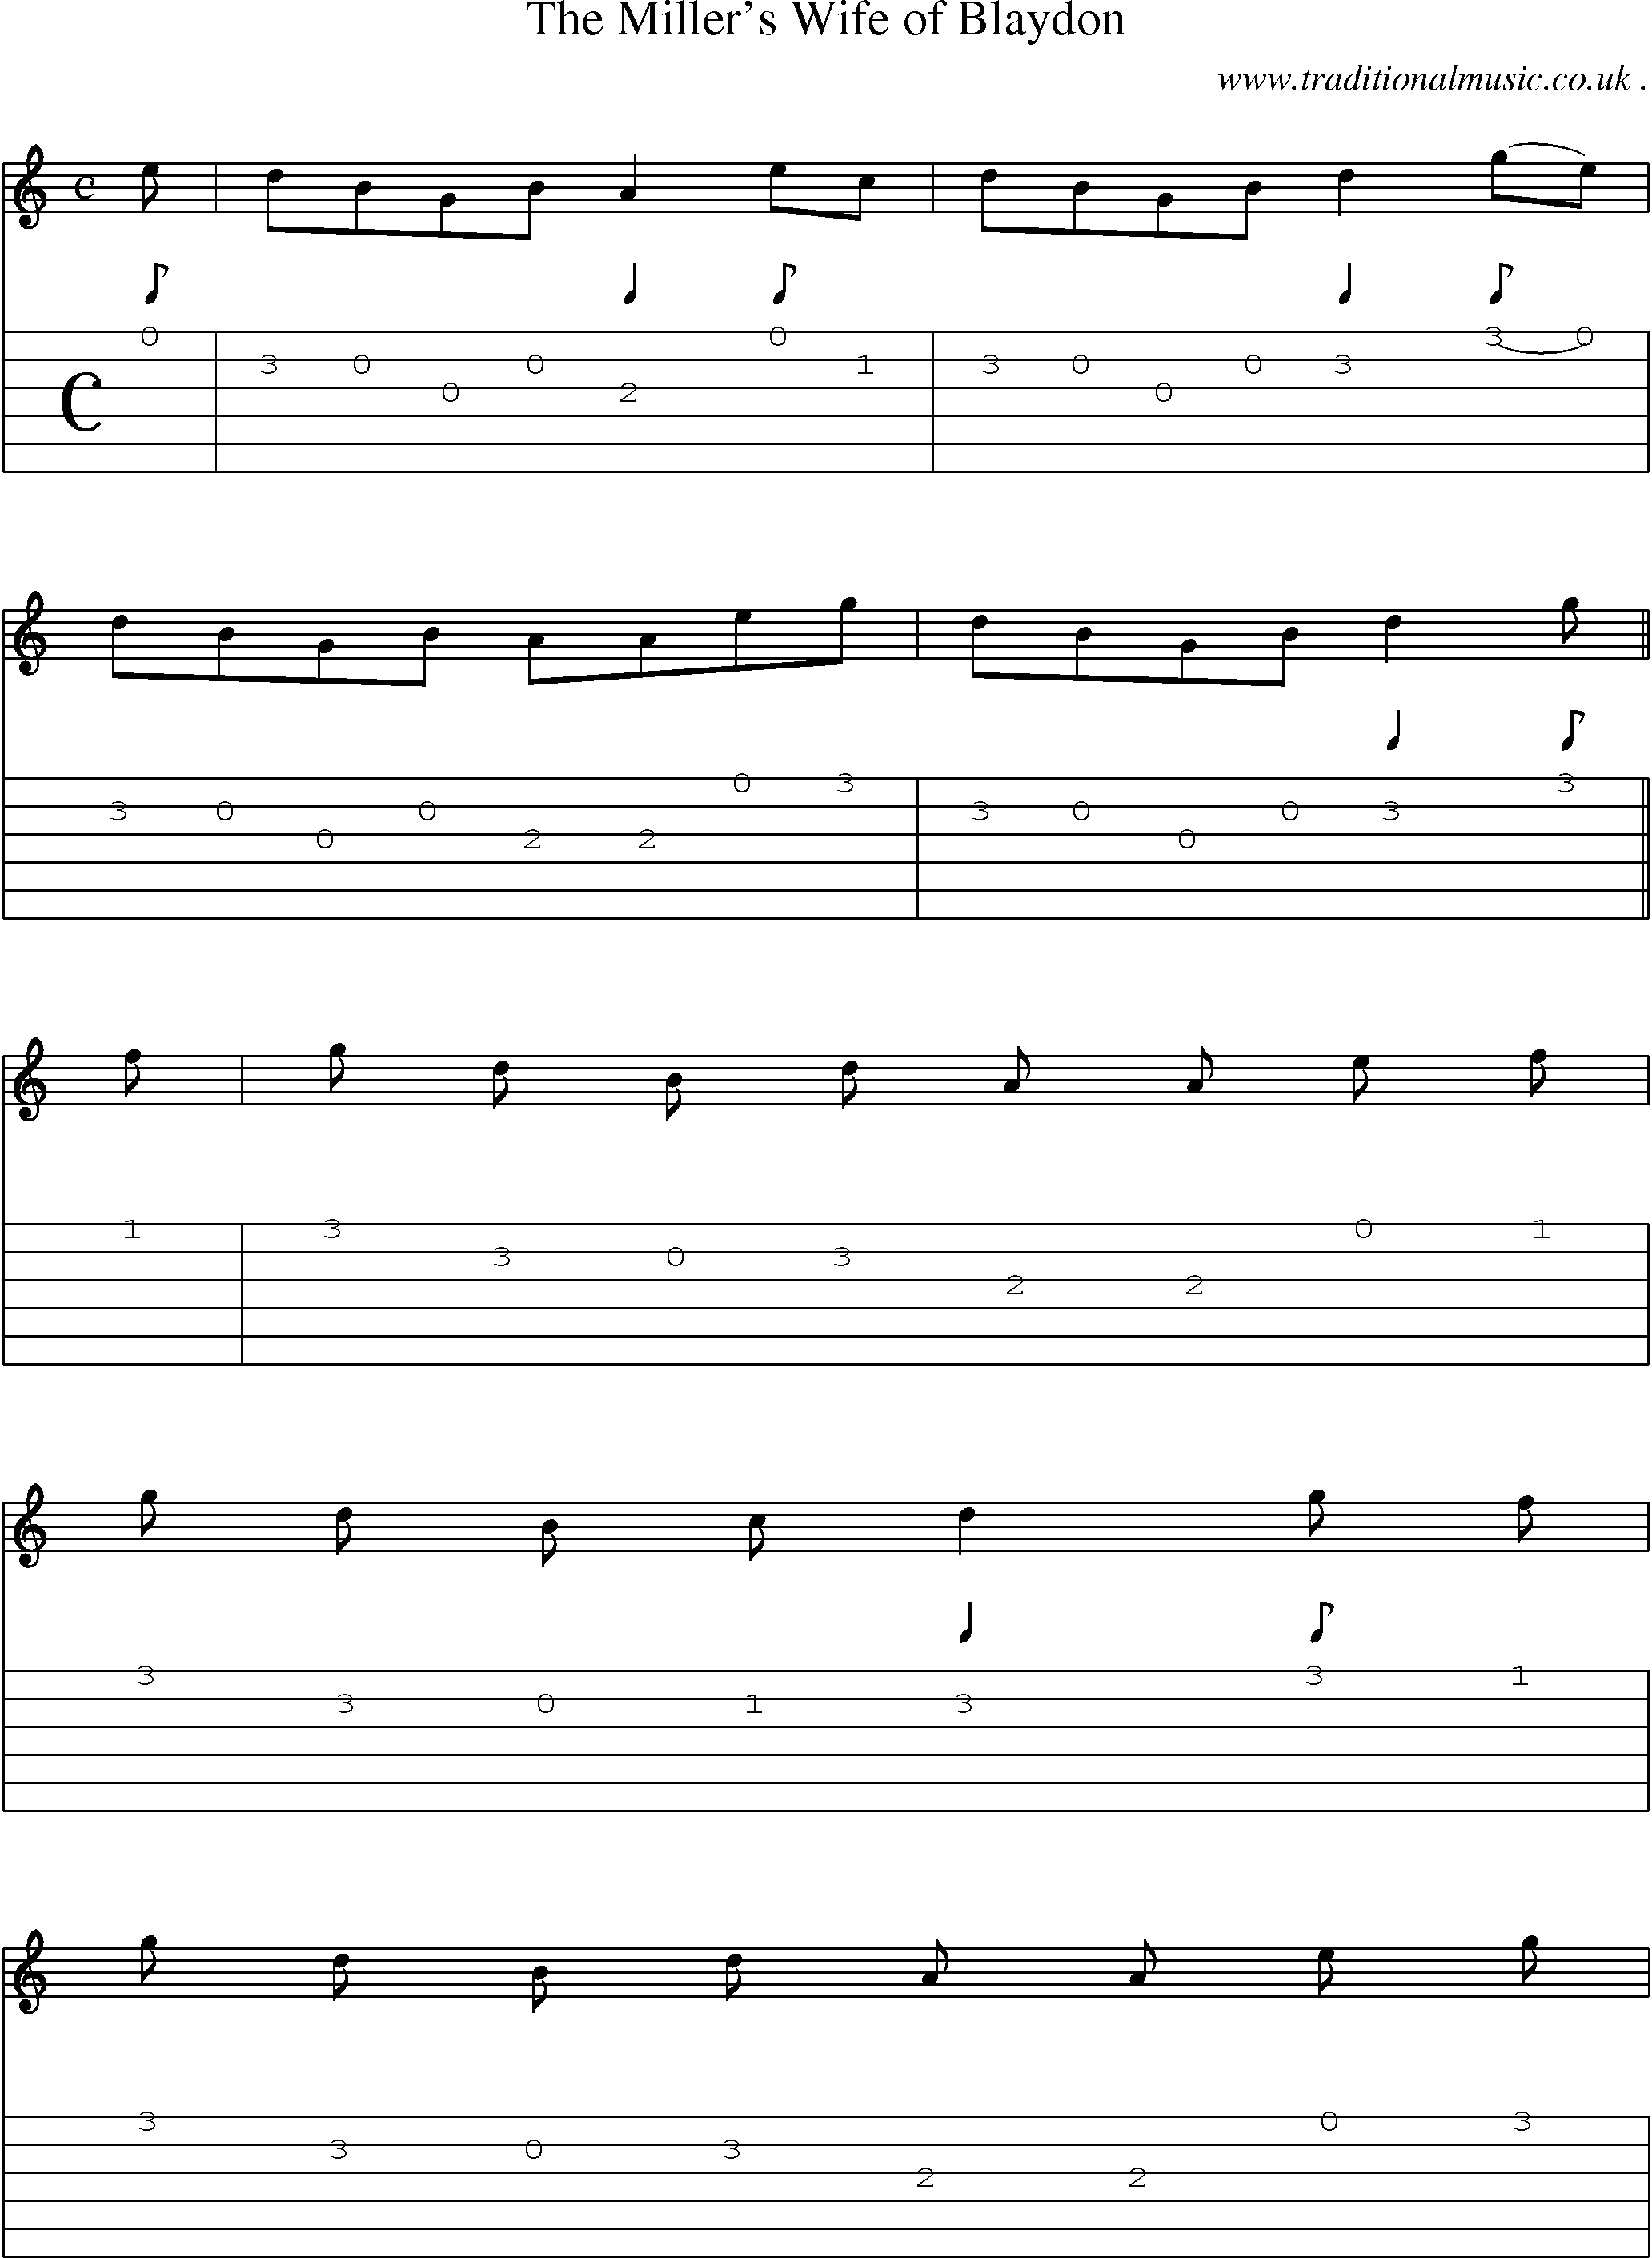 Sheet-Music and Guitar Tabs for The Millers Wife Of Blaydon